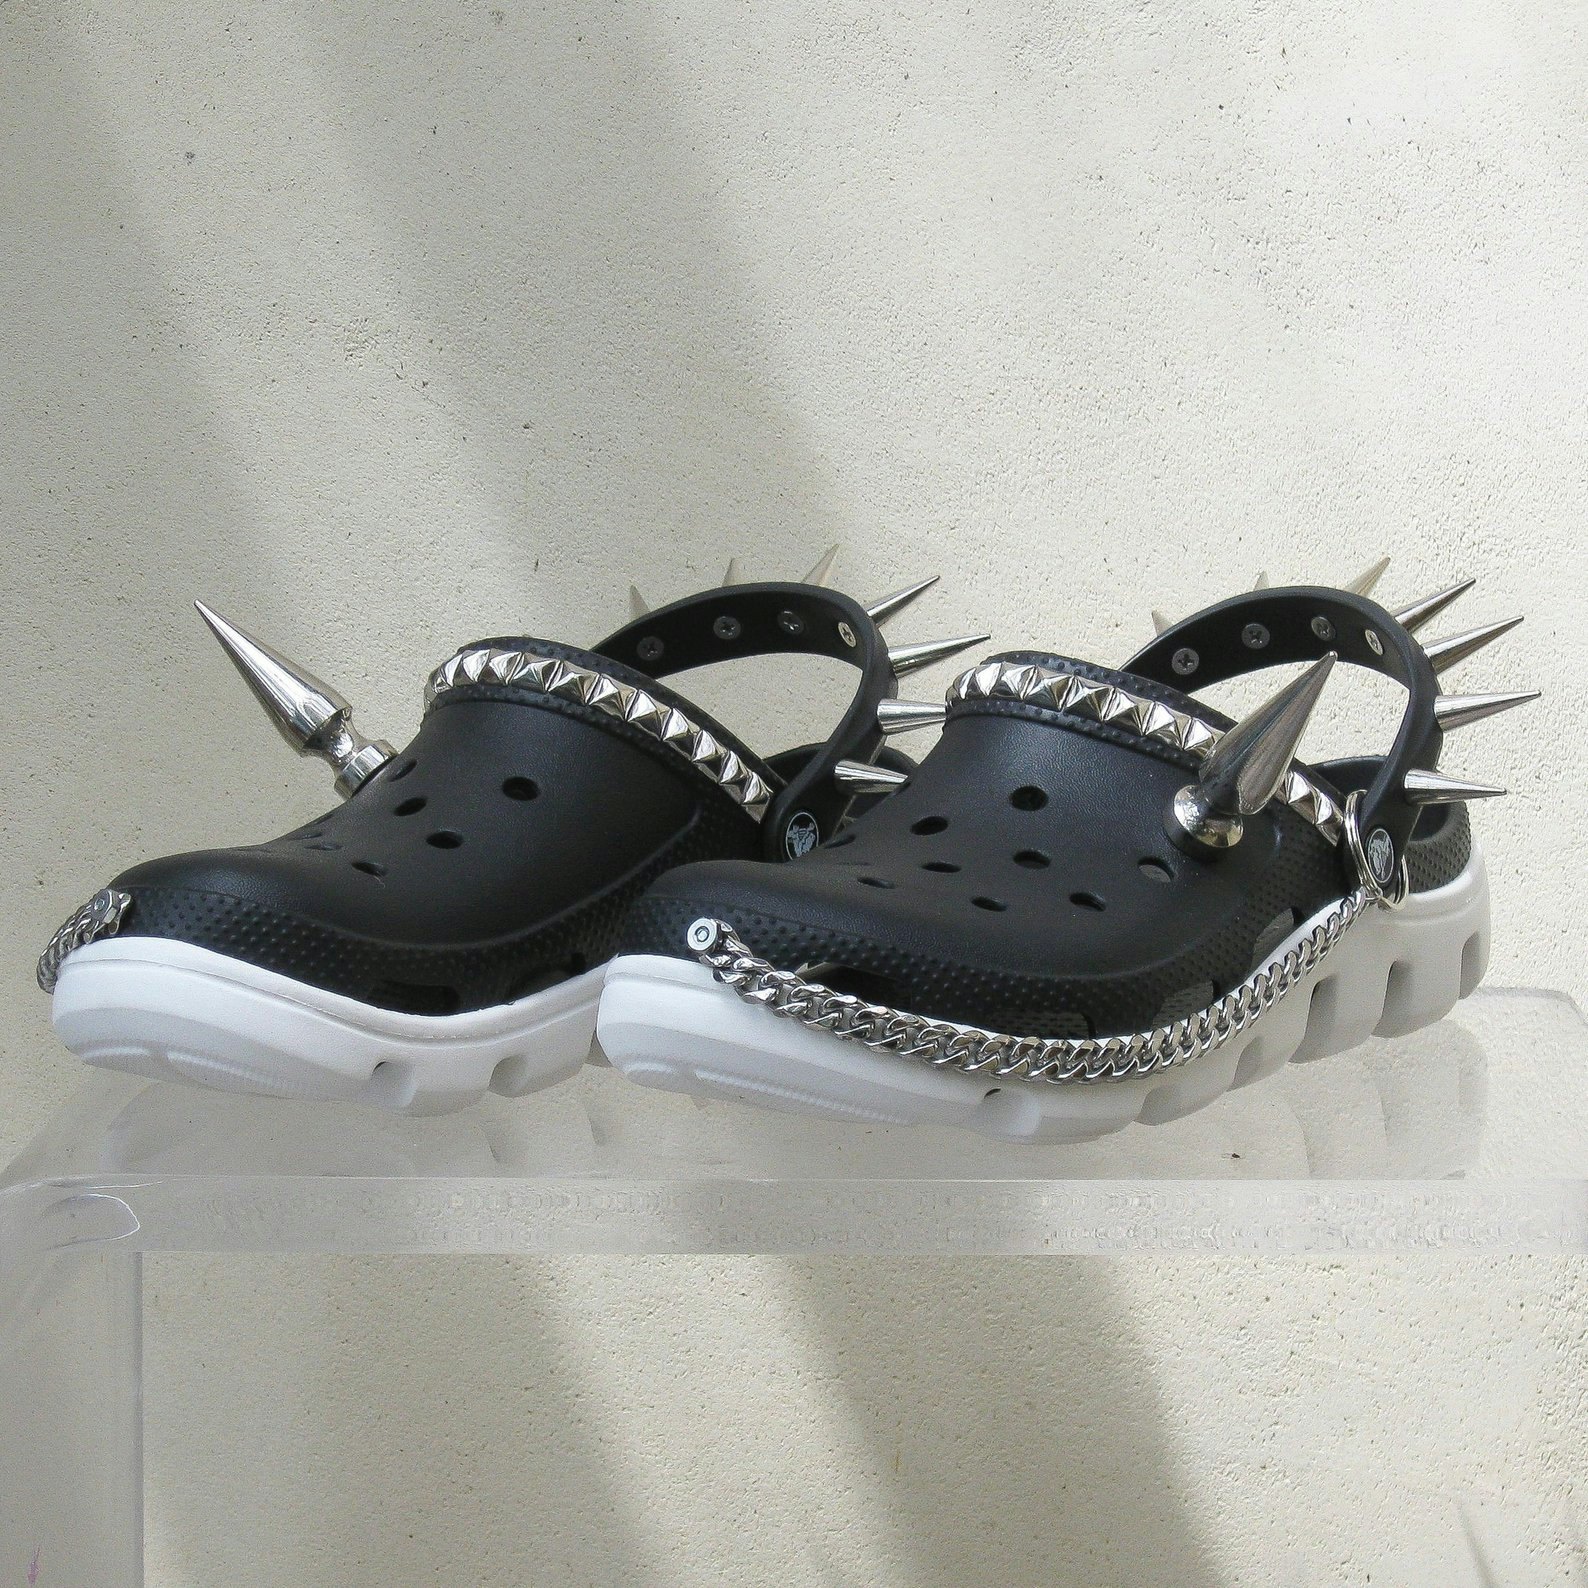 goth crocs with spikes